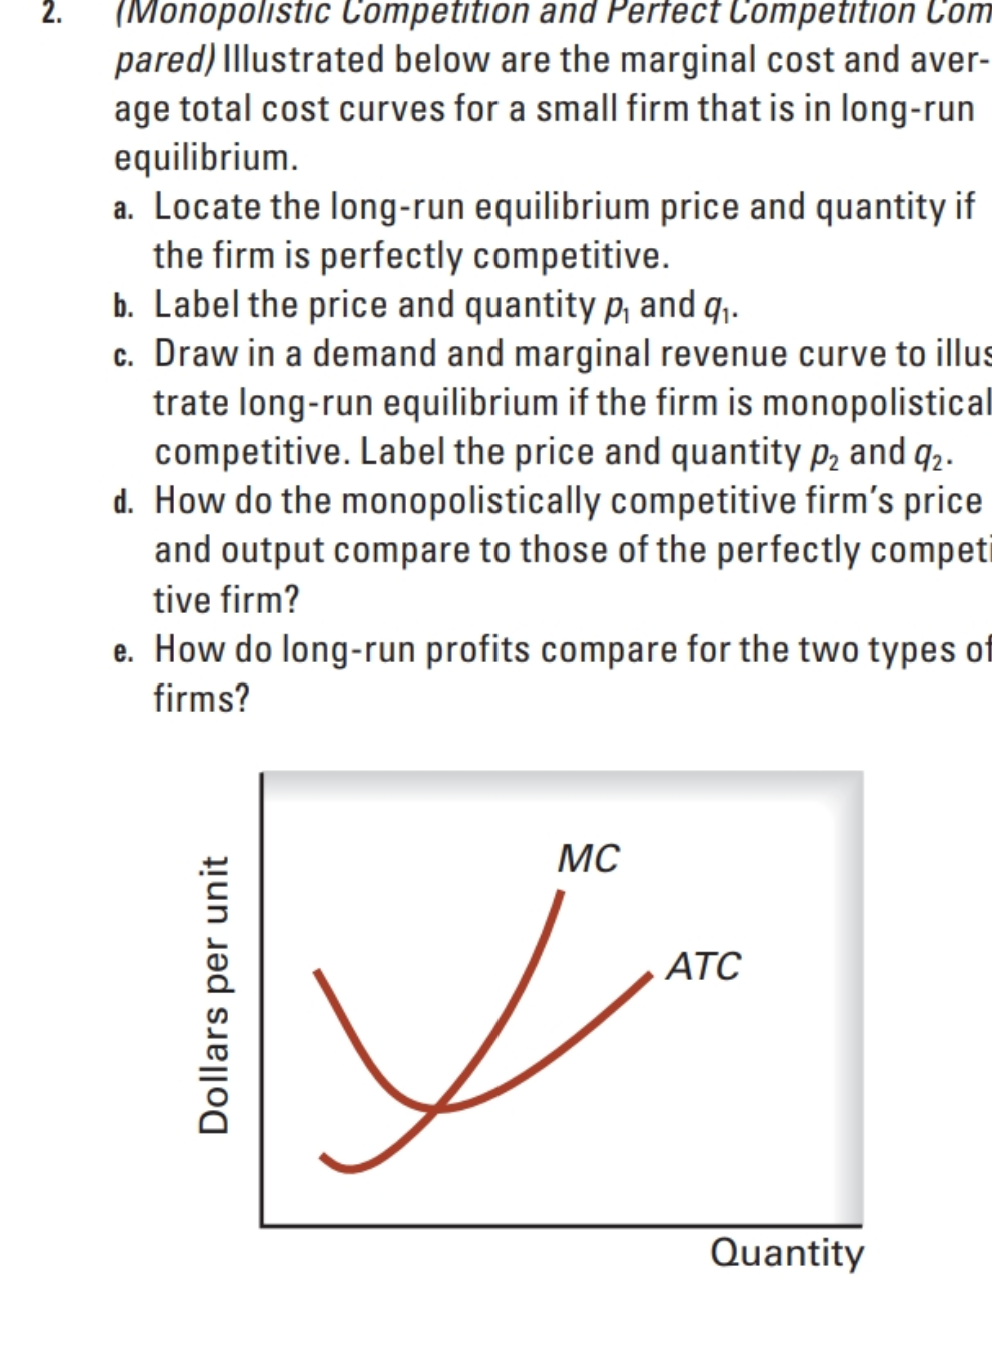 (Monopolistic Competition an
pared)|llustrated below are the marginal cost and aver-
age total cost curves for a small firm that is in long-run
equilibrium.
a. Locate the long-run equilibrium price and quantity if
the firm is perfectly competitive.
b. Label the price and quantity p, and q,.
c. Draw in a demand and marginal revenue curve to illus
trate long-run equilibrium if the firm is monopolistica
competitive. Label the price and quantity p, and q,.
d. How do the monopolistically competitive firm's price
and output compare to those of the perfectly compet
(/мопороistic
тре
Competitionh Com
tive firm?
e. How do long-run profits compare for the two types o
firms?
